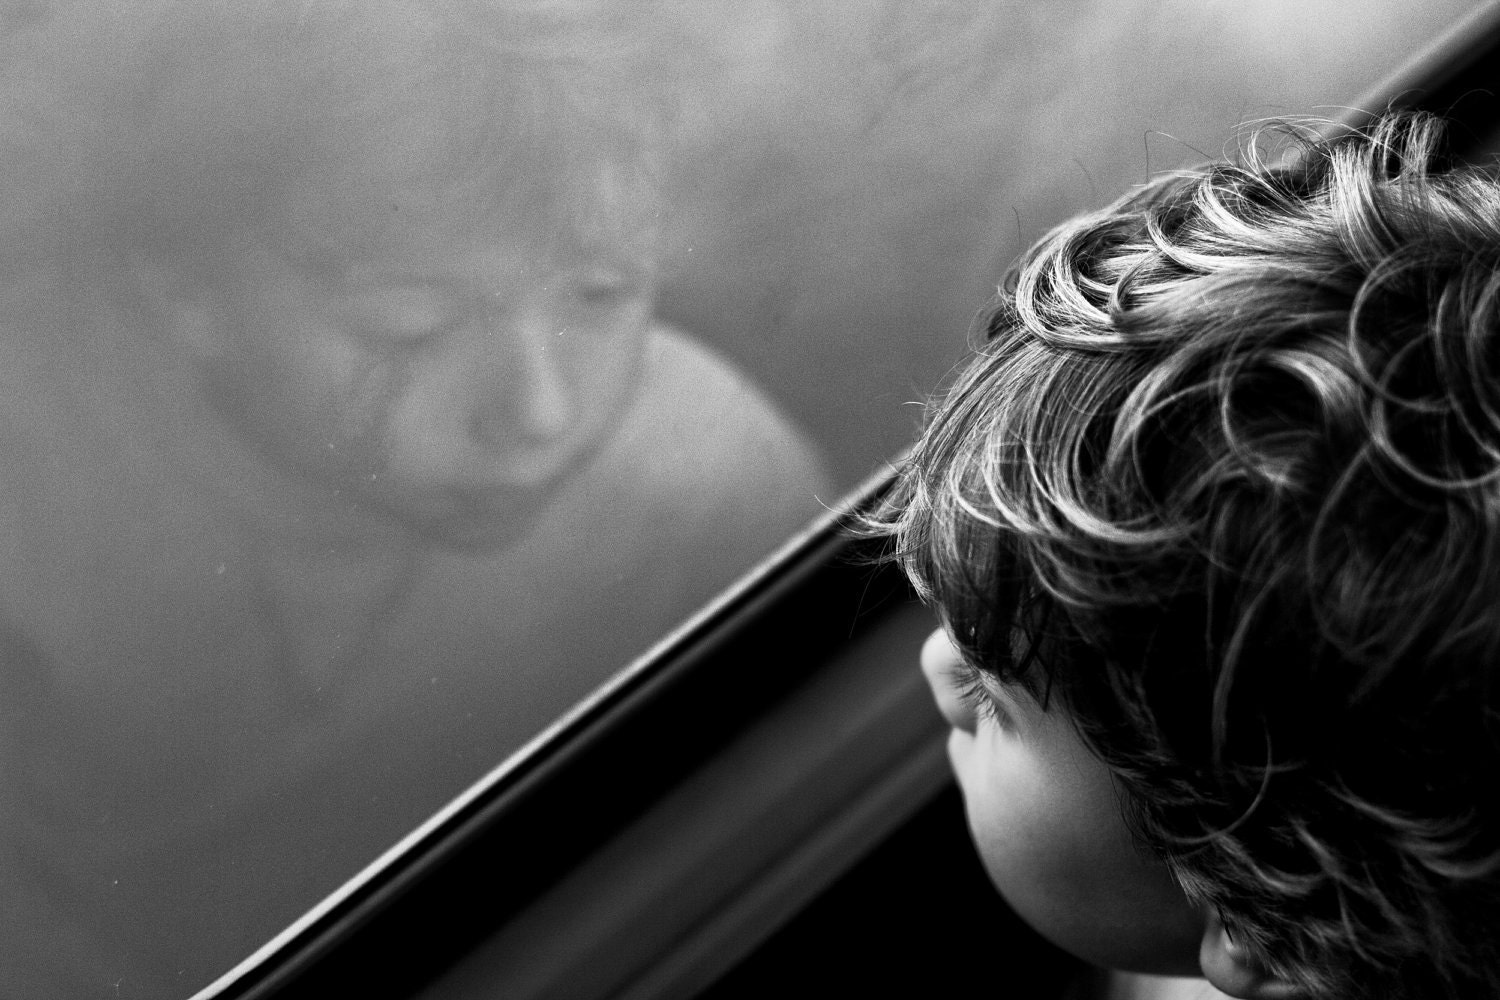 The Boy that Stayed - Signed Archival Fine Art Print - Black and White Photography by Sabato Visconti - Silver Tone Child Portrait in Train - Sabatobox